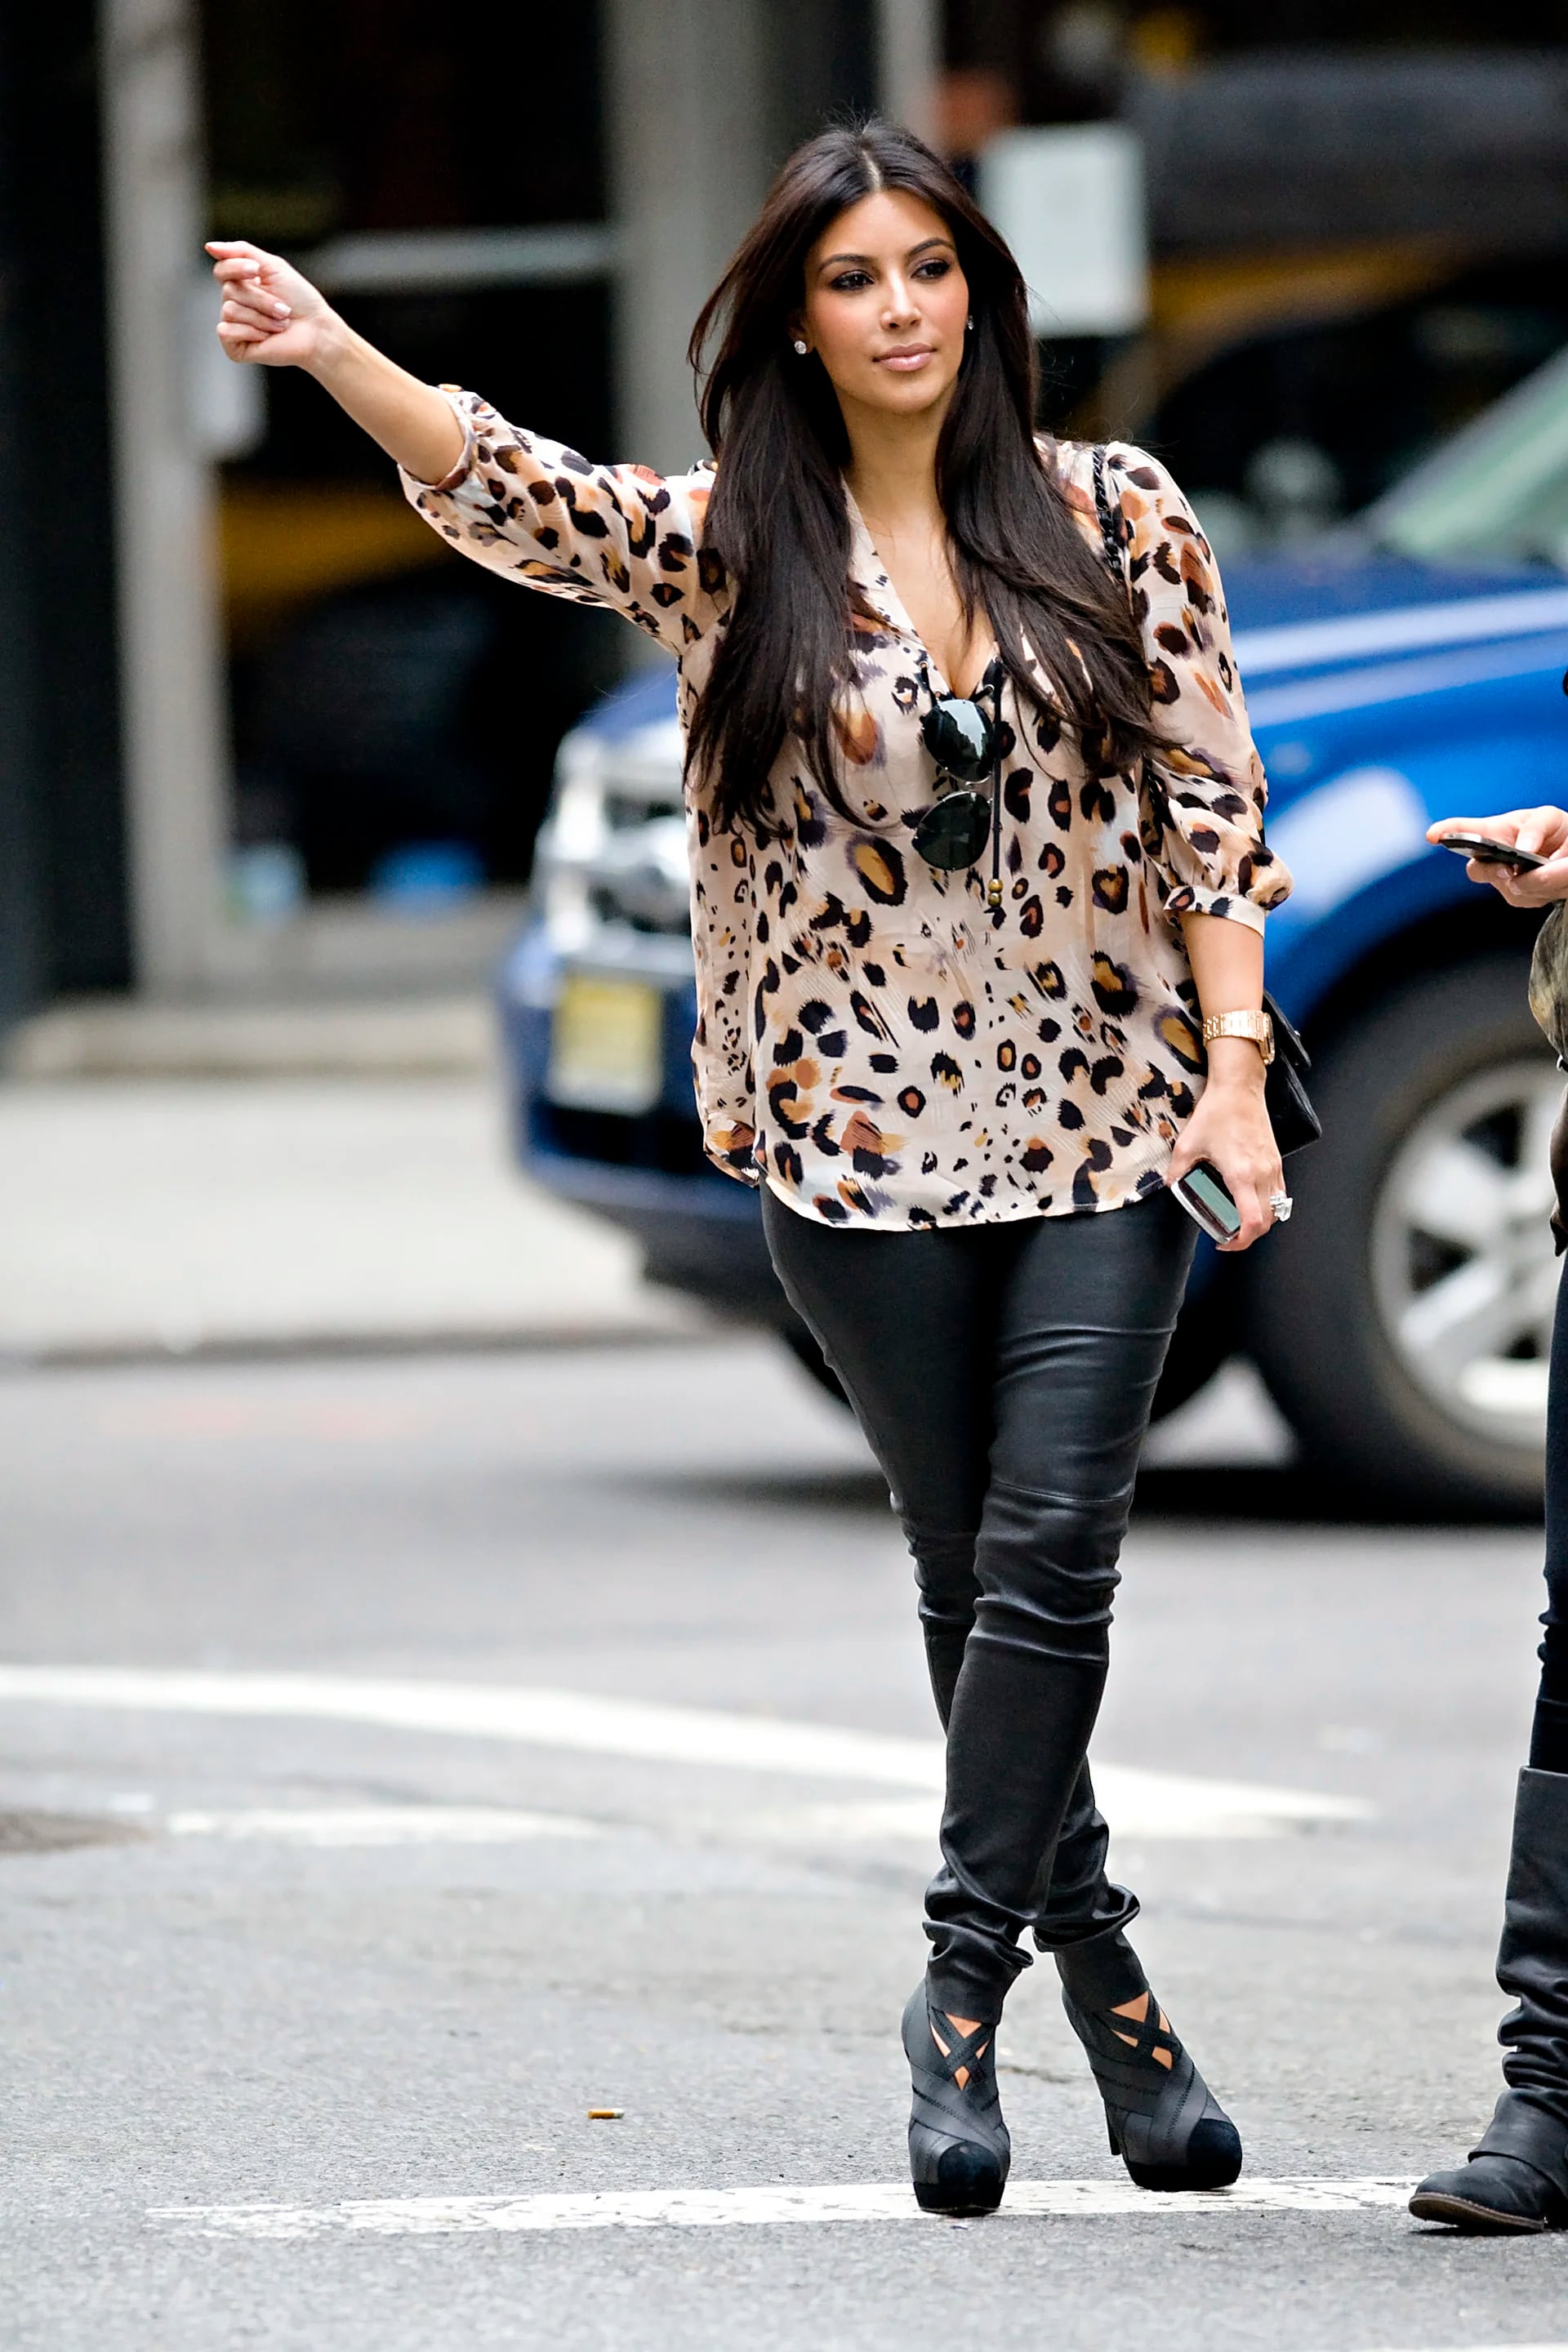 Kim Kardashian seen wearing leopard print top and leather pants hailing a cab in NYC.